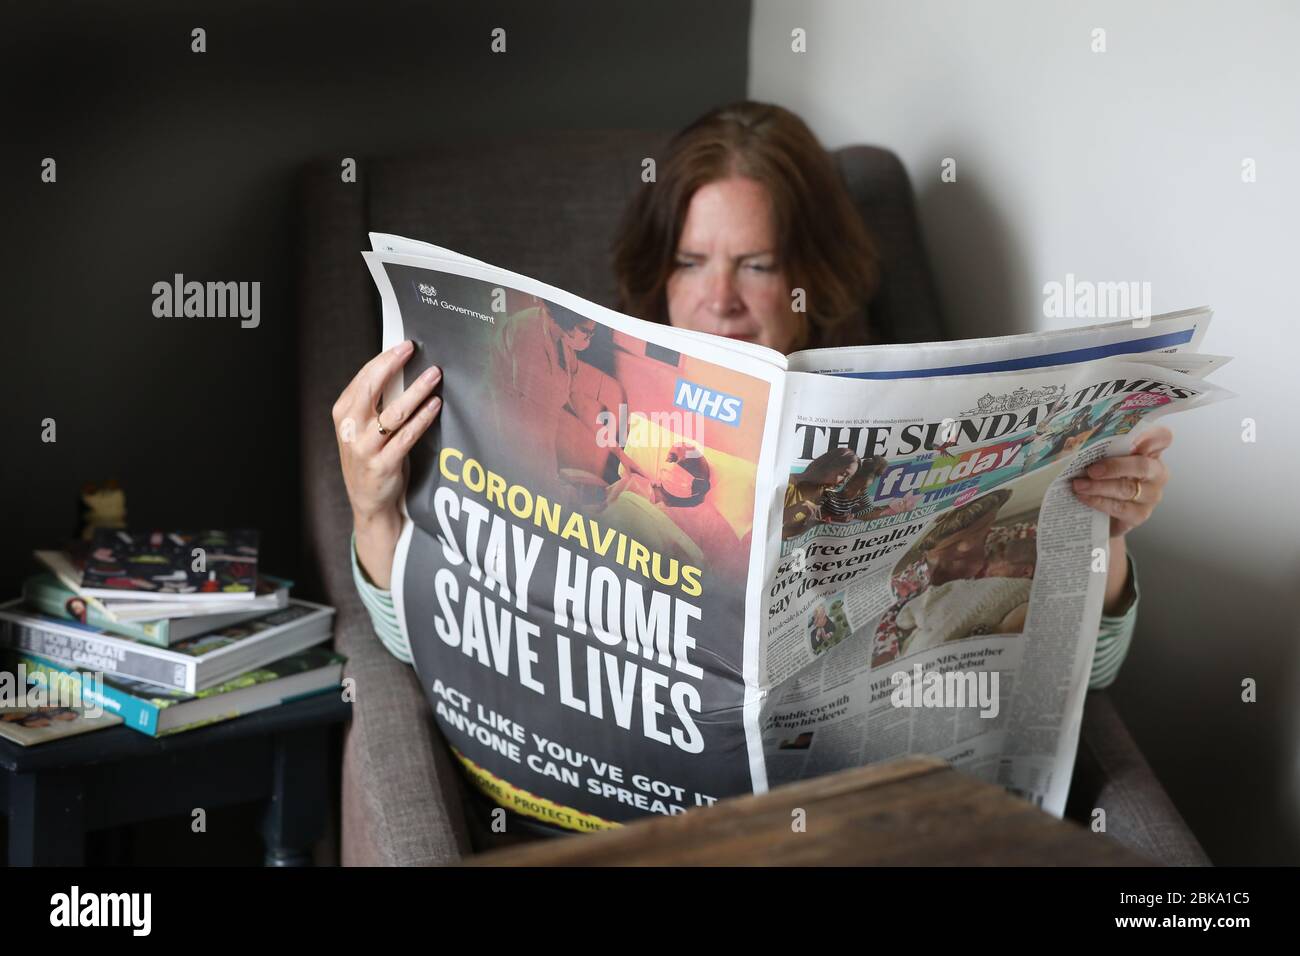 A woman reading the Sunday Times Newspaper at home during Lockdown due to the Coronavirus Pandemic sweeping the world. Stock Photo